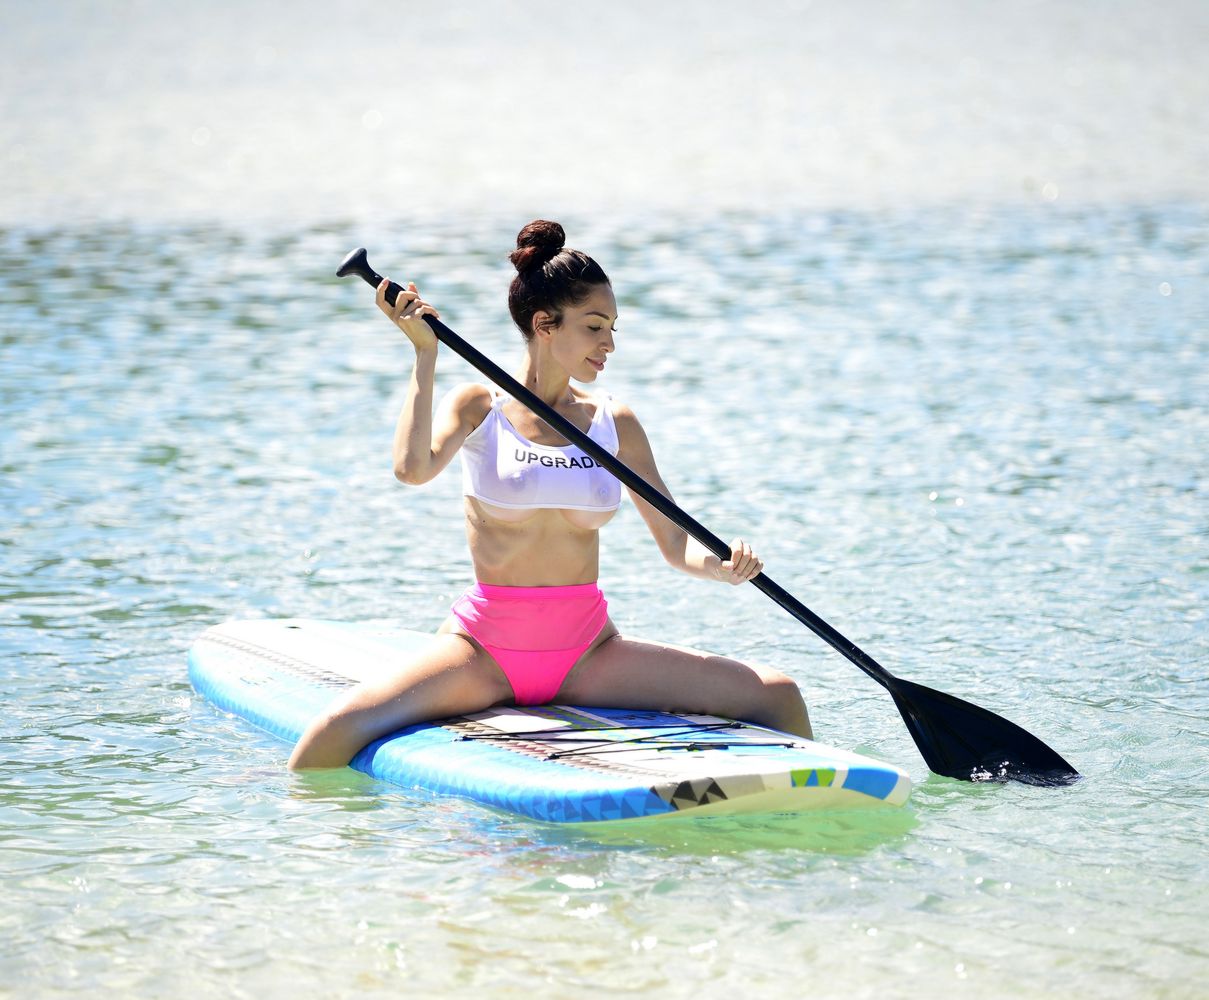 Farrah Abraham goes Paddle-Boarding in a See Through Top!